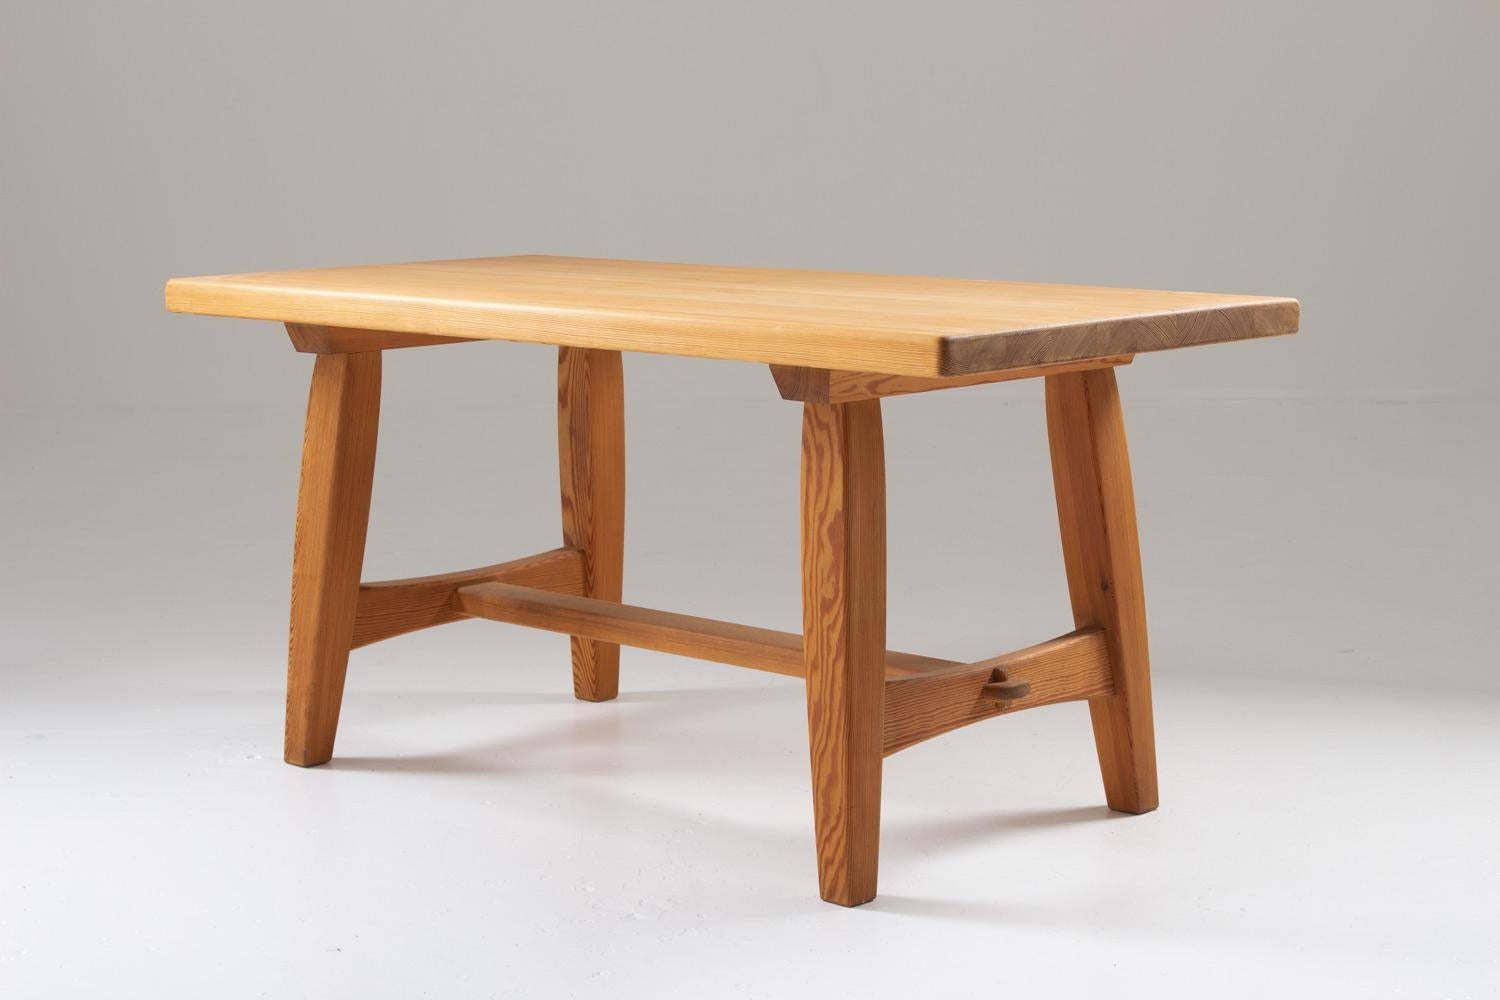 Beautiful Norwegian coffee table by Krogenæs, 1960s.
Krogenæs is well known for their high-quality pine furniture. This coffee table is a great example with its simple and robust design. 

Condition: Very good vintage condition with light signs